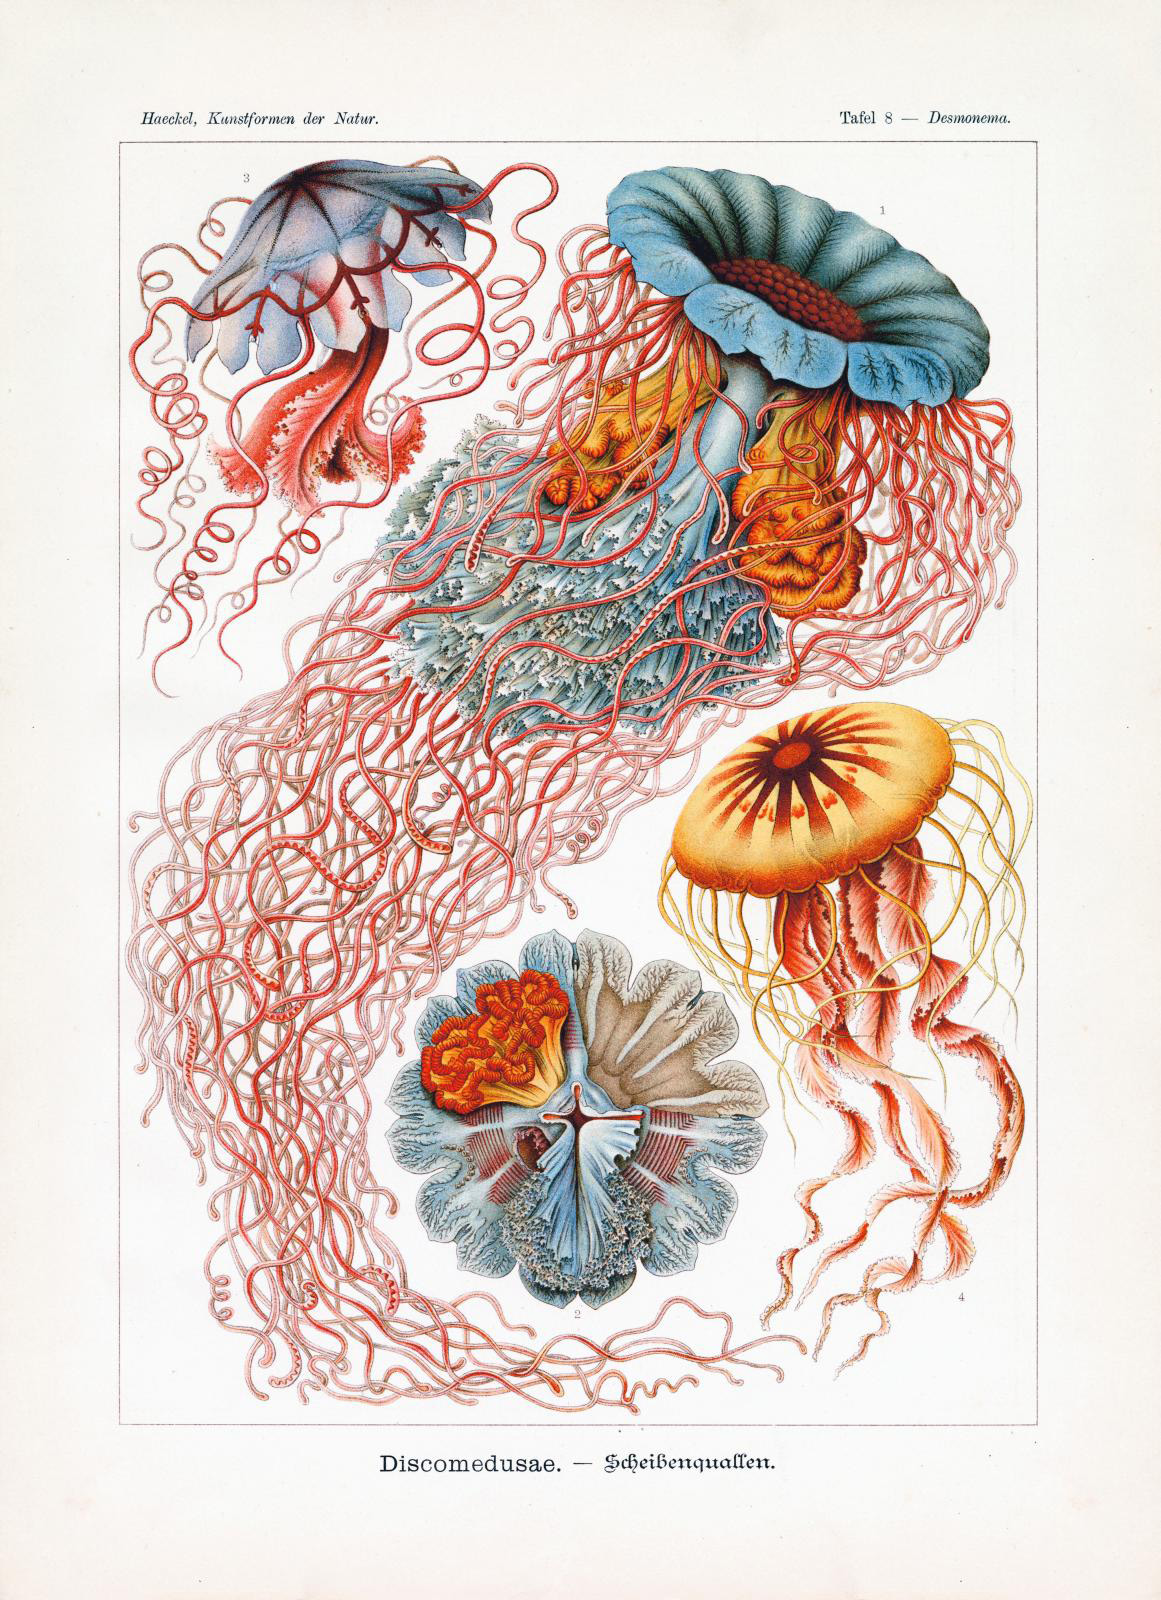 Ernst Haeckel, the Zoologist Who Inspired 20th-Century Art